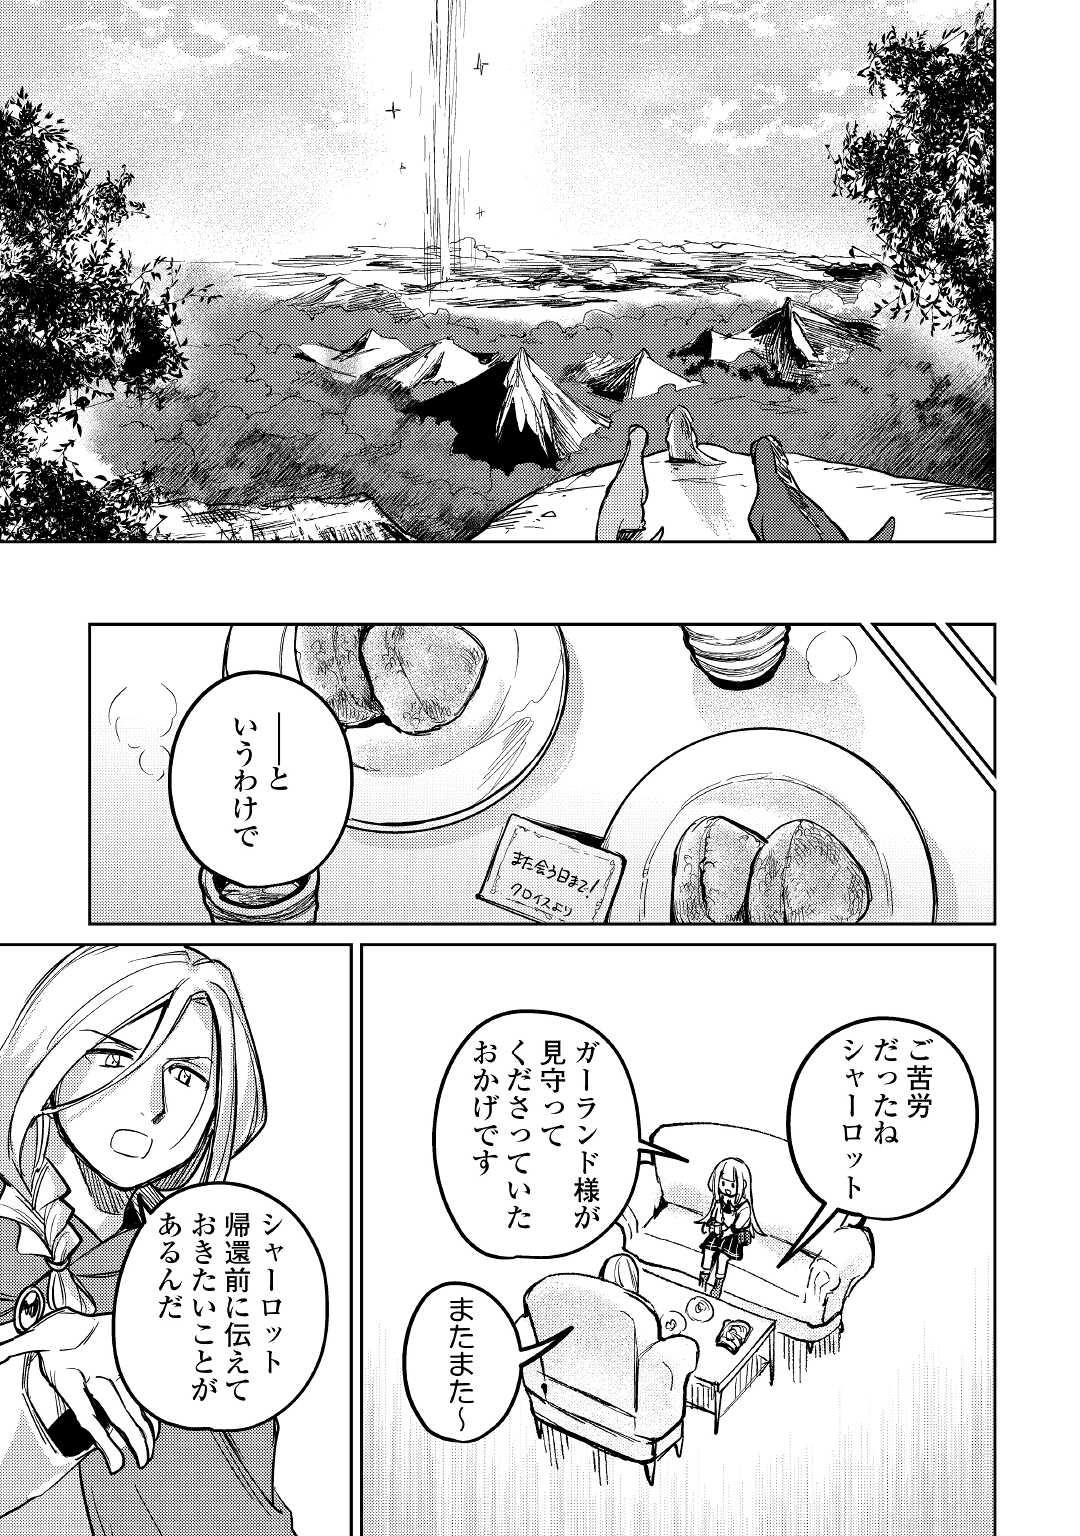 The Former Structural Researcher’s Story of Otherworldly Adventure 第41話 - Page 19